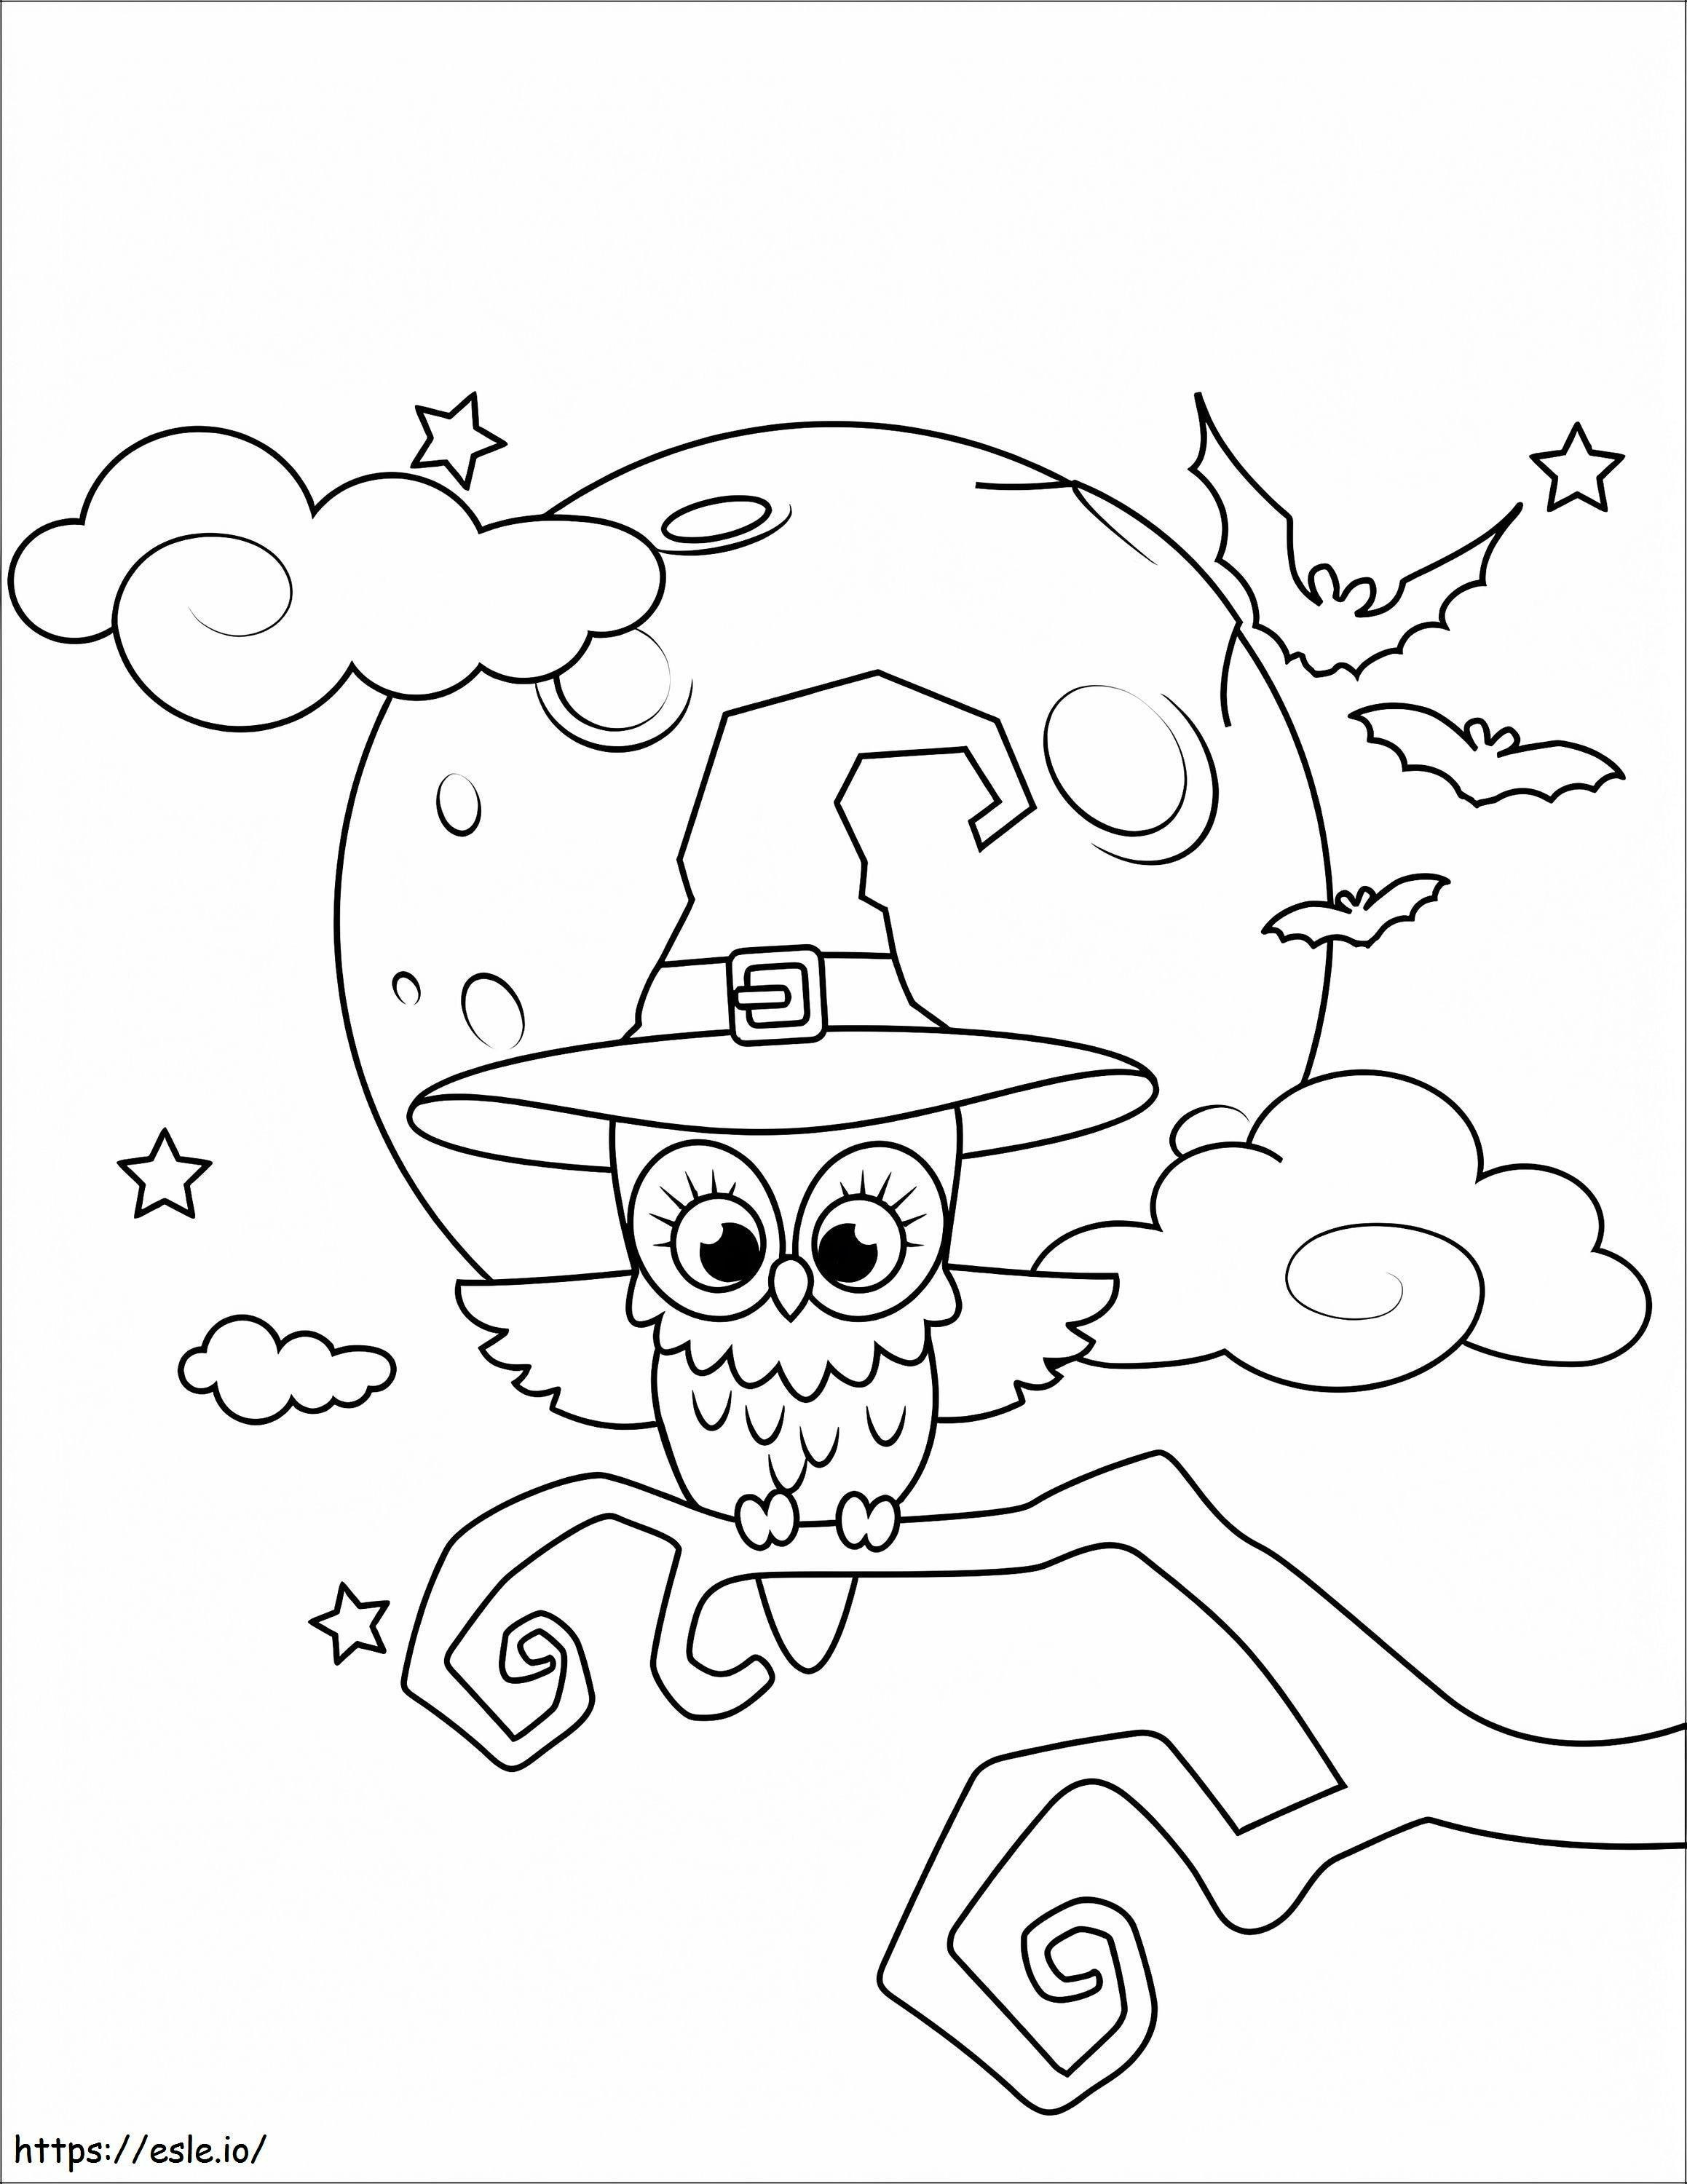 Cute Halloween Owl coloring page